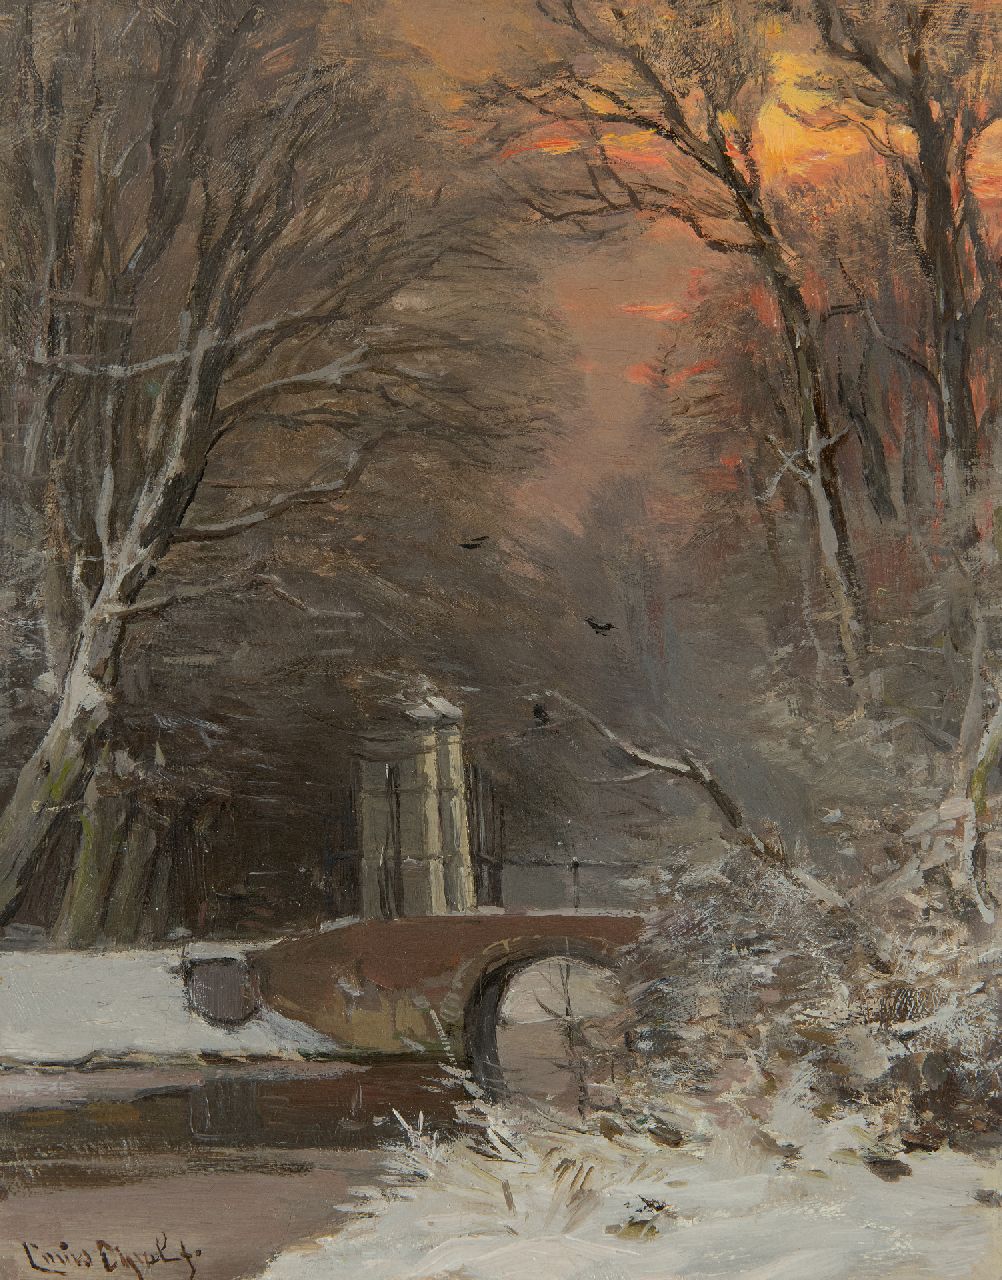 Apol L.F.H.  | Lodewijk Franciscus Hendrik 'Louis' Apol | Paintings offered for sale | View in a snowy forest at dusk, oil on panel 27.4 x 21.9 cm, signed l.l.